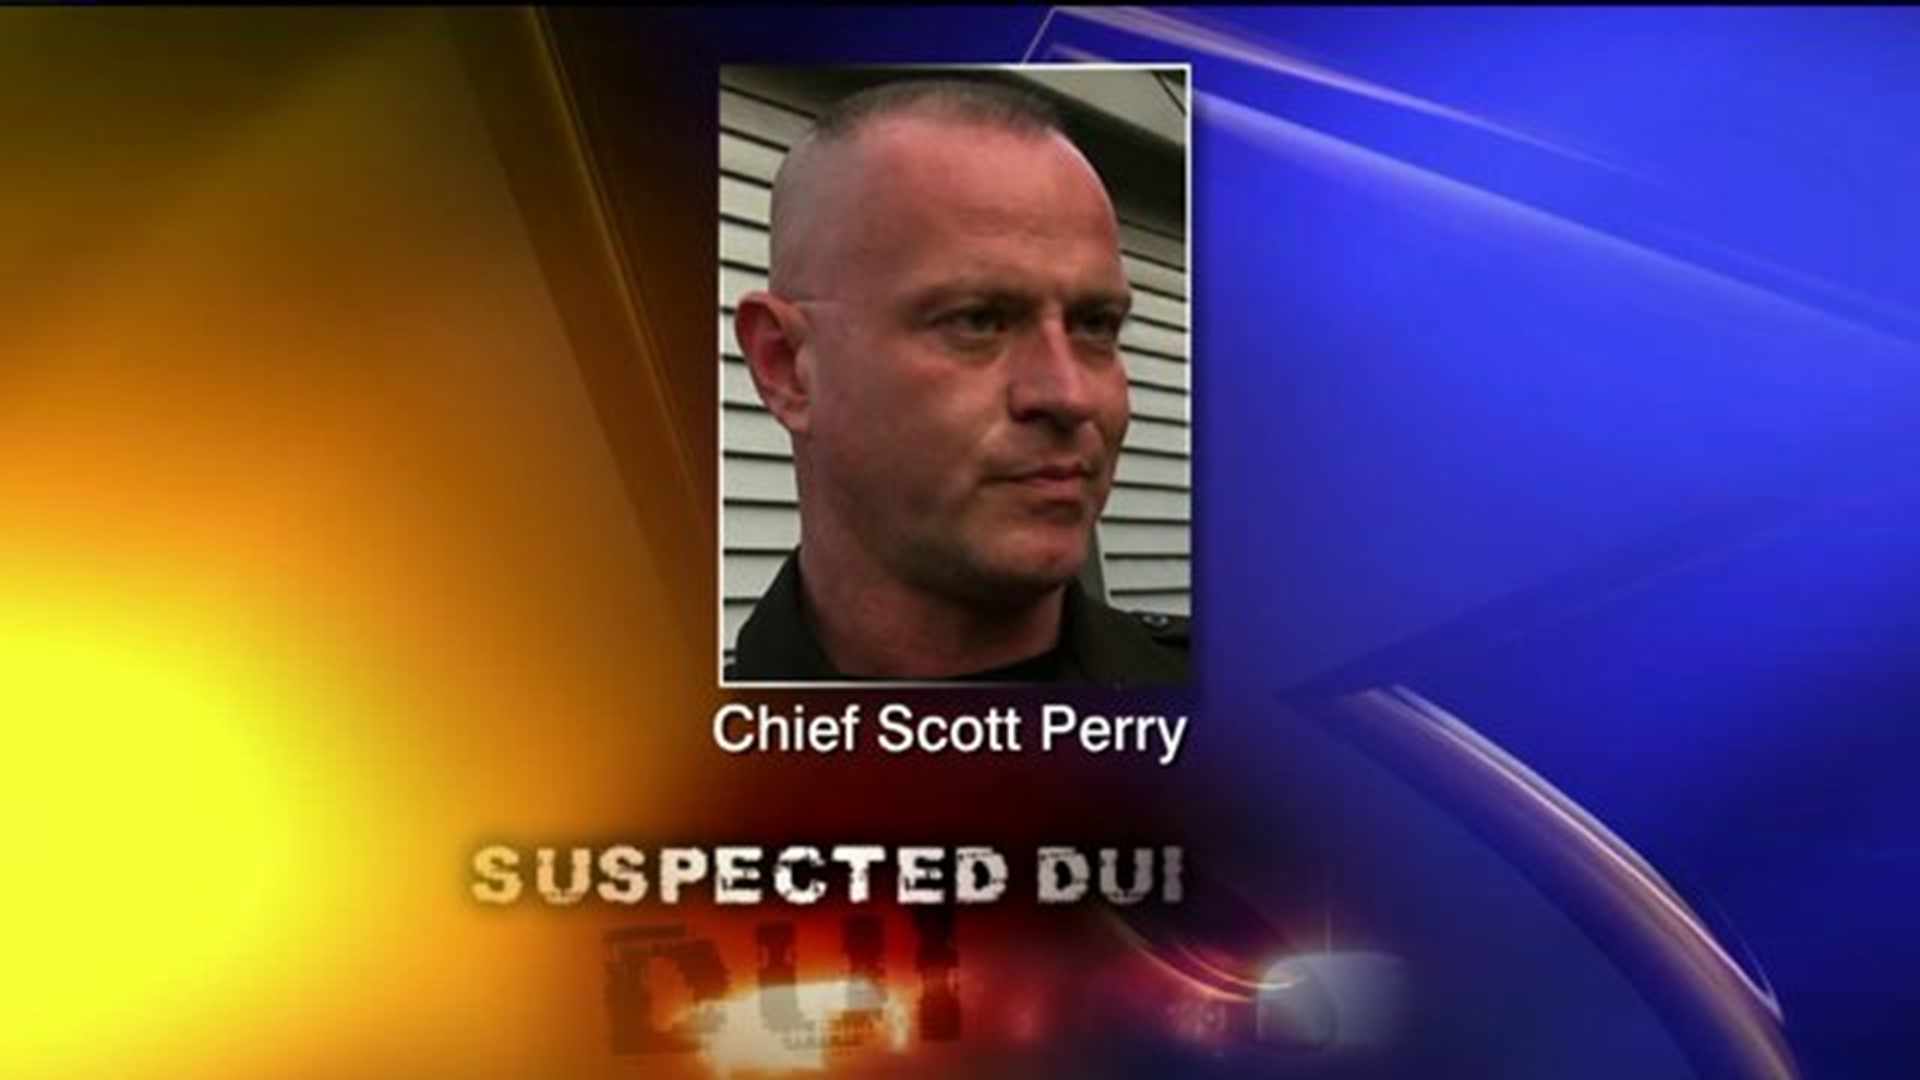 Police Chief Accused of DUI While On Duty